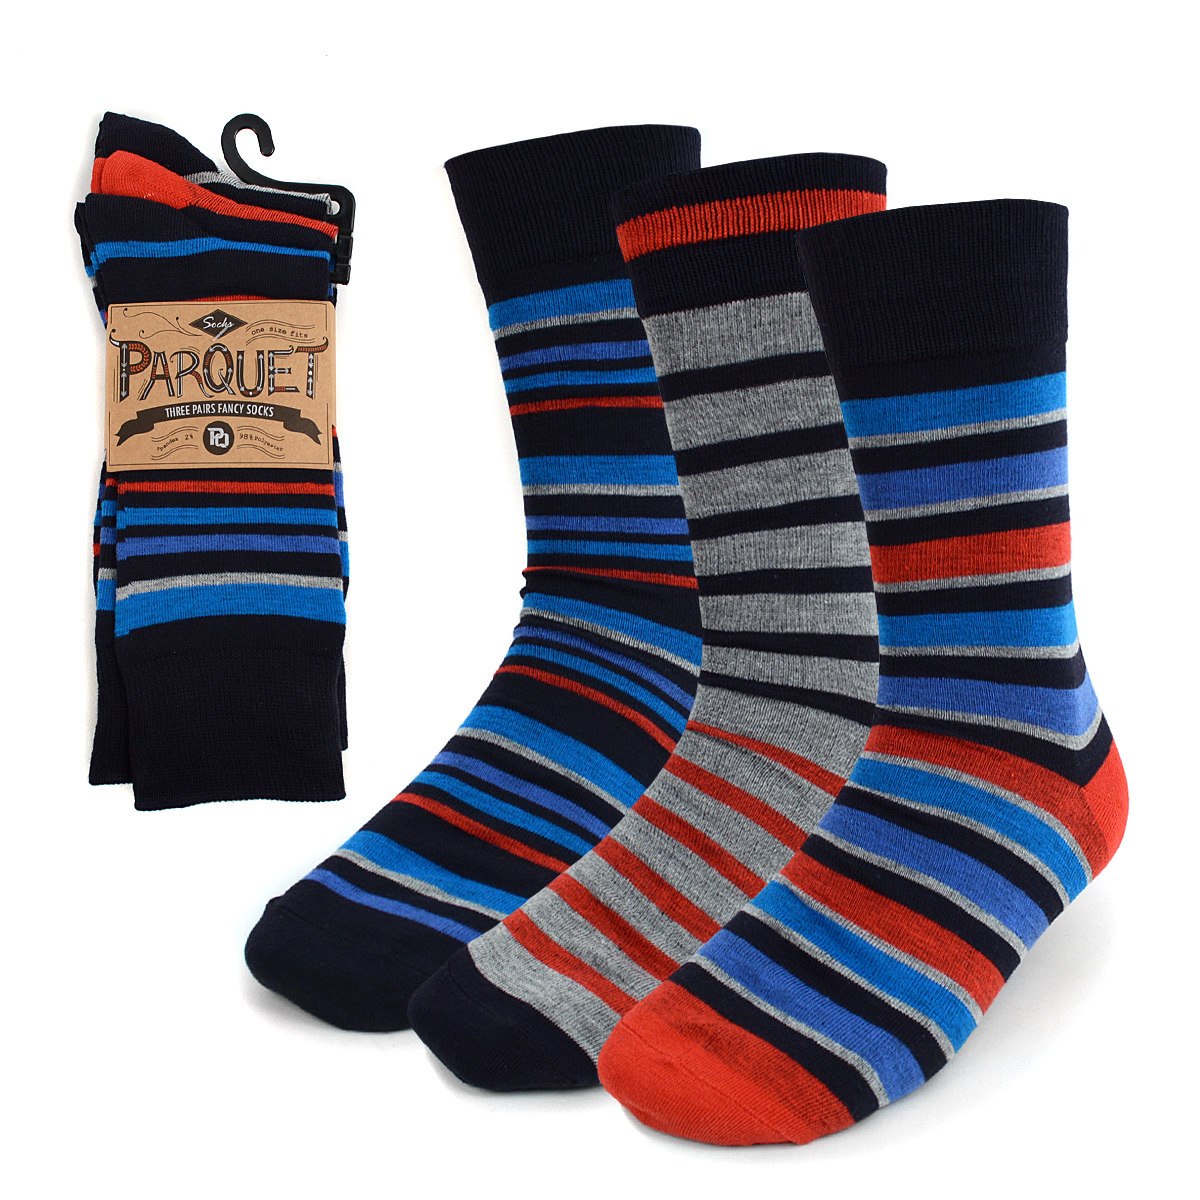 Parquet Men's Fancy, Dress, Casual and Crew Fun Socks - 3 Pair Bundle (Stripes - Navy, Red, Blue and Grey)